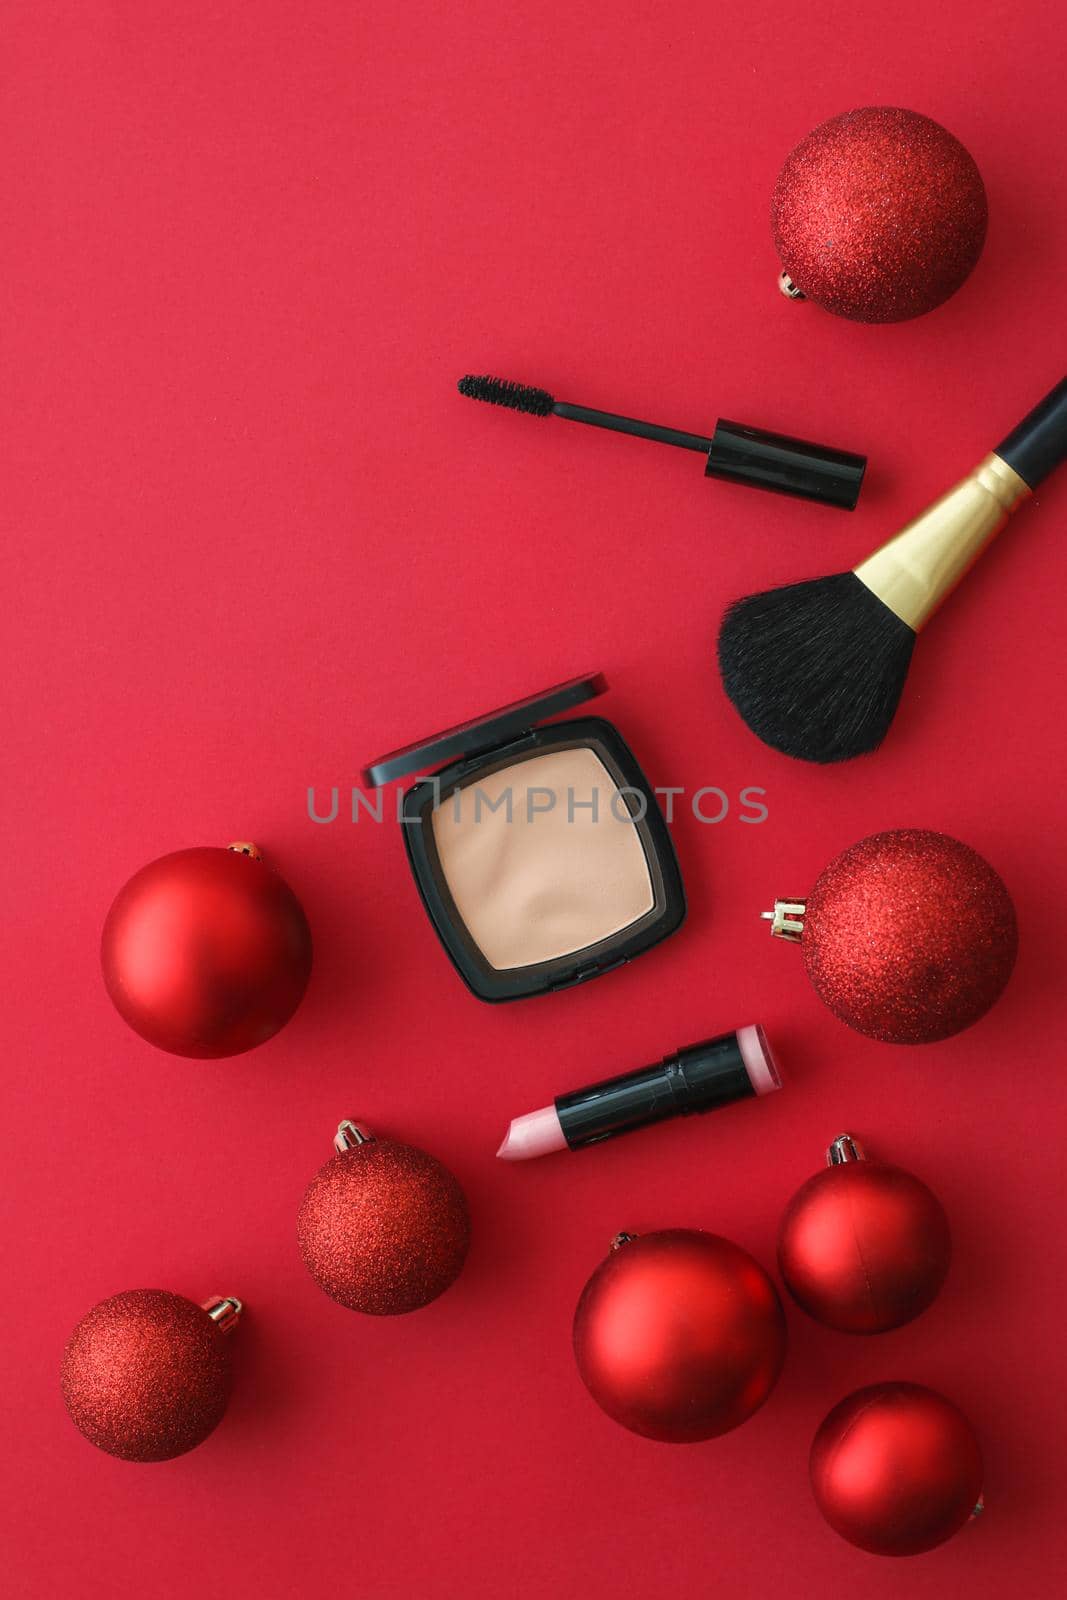 Cosmetic branding, fashion blog cover and girly glamour concept - Make-up and cosmetics product set for beauty brand Christmas sale promotion, luxury red flatlay background as holiday design